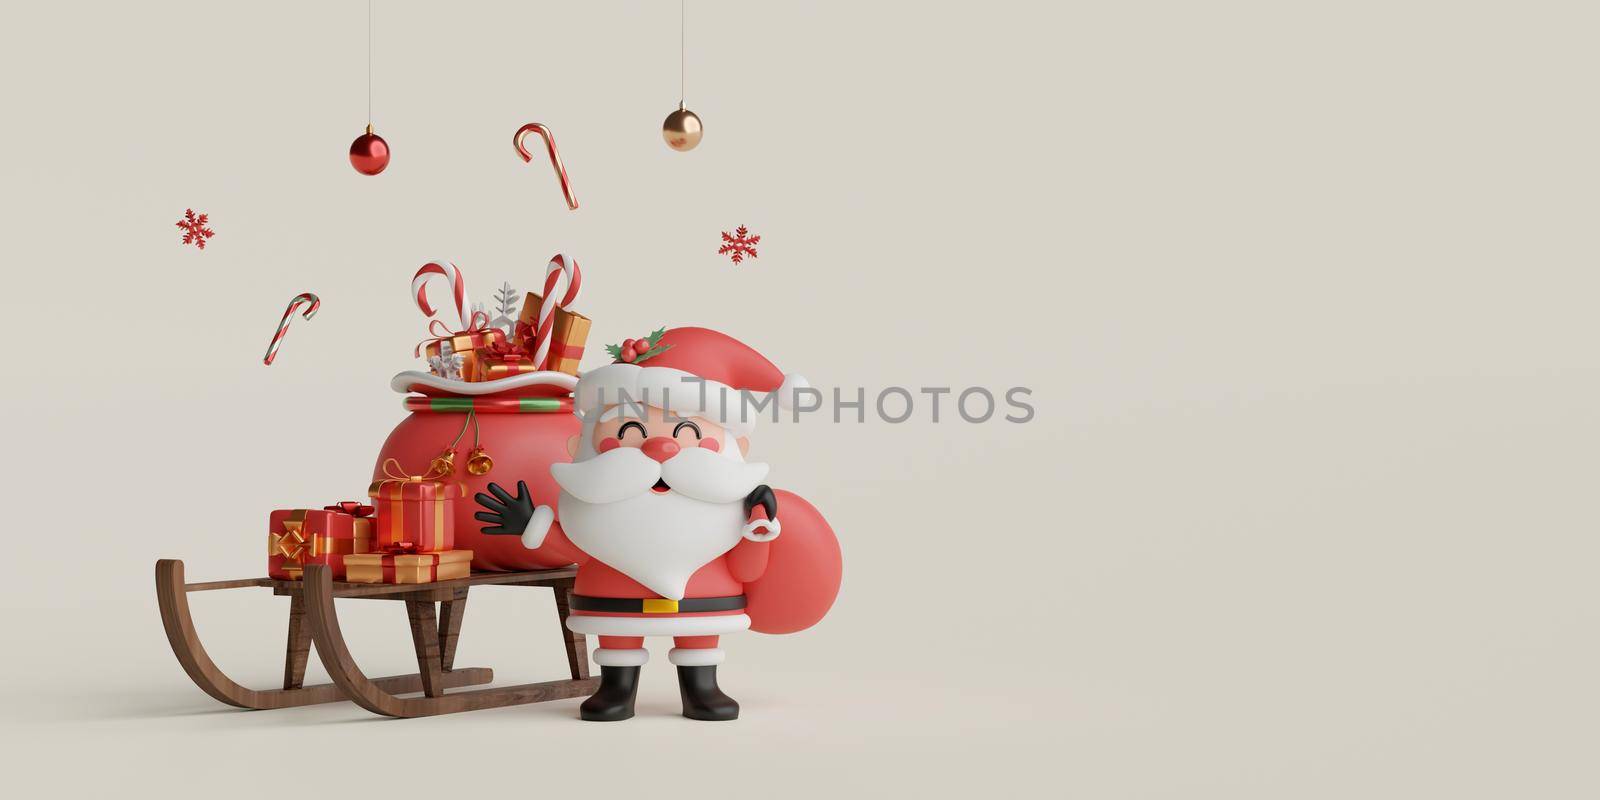 Christmas banner of Santa Claus with gift bag on sleigh, 3d illustration by nutzchotwarut